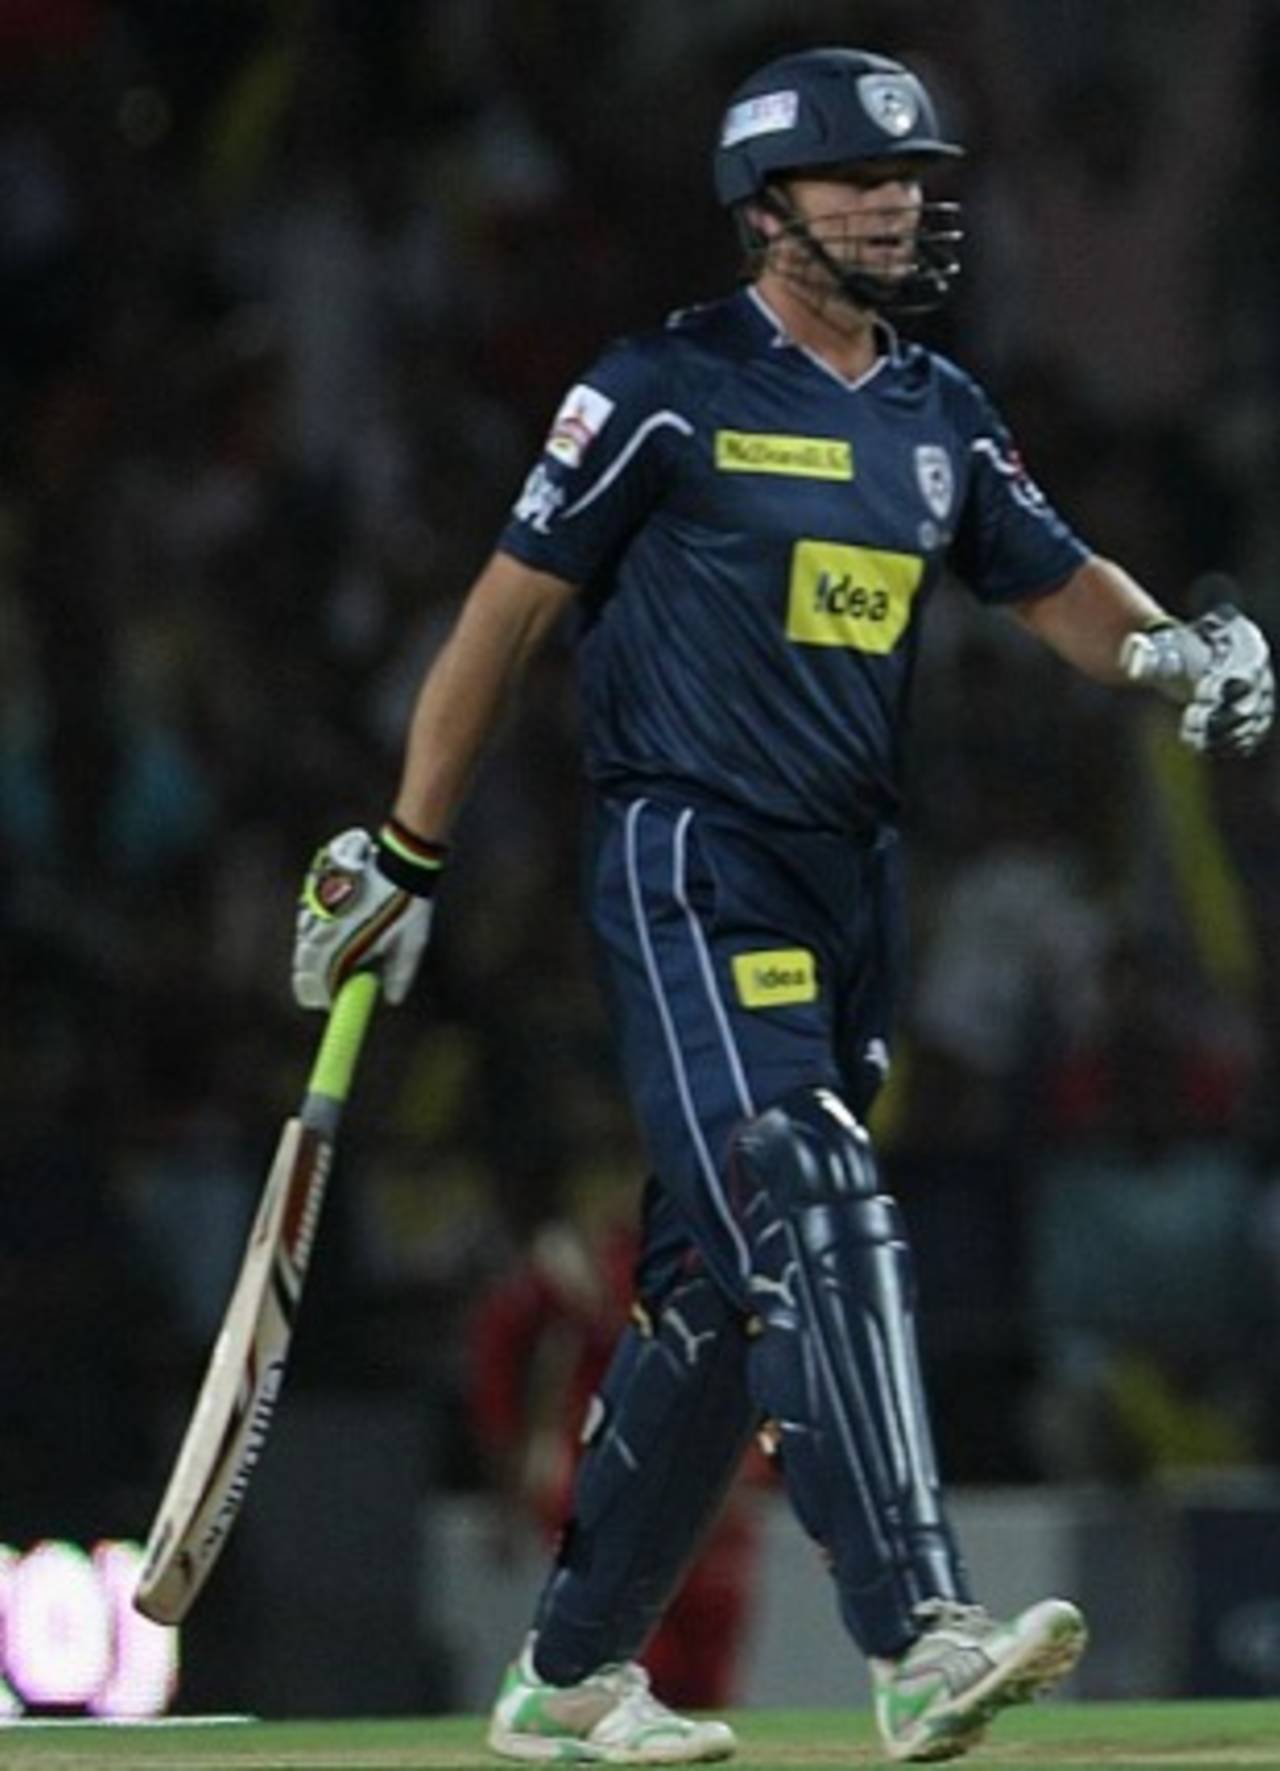 Adam Gilchrist failed to open his account, Deccan Chargers v Royal Challengers Bangalore, IPL, Nagpur, April 12, 2010